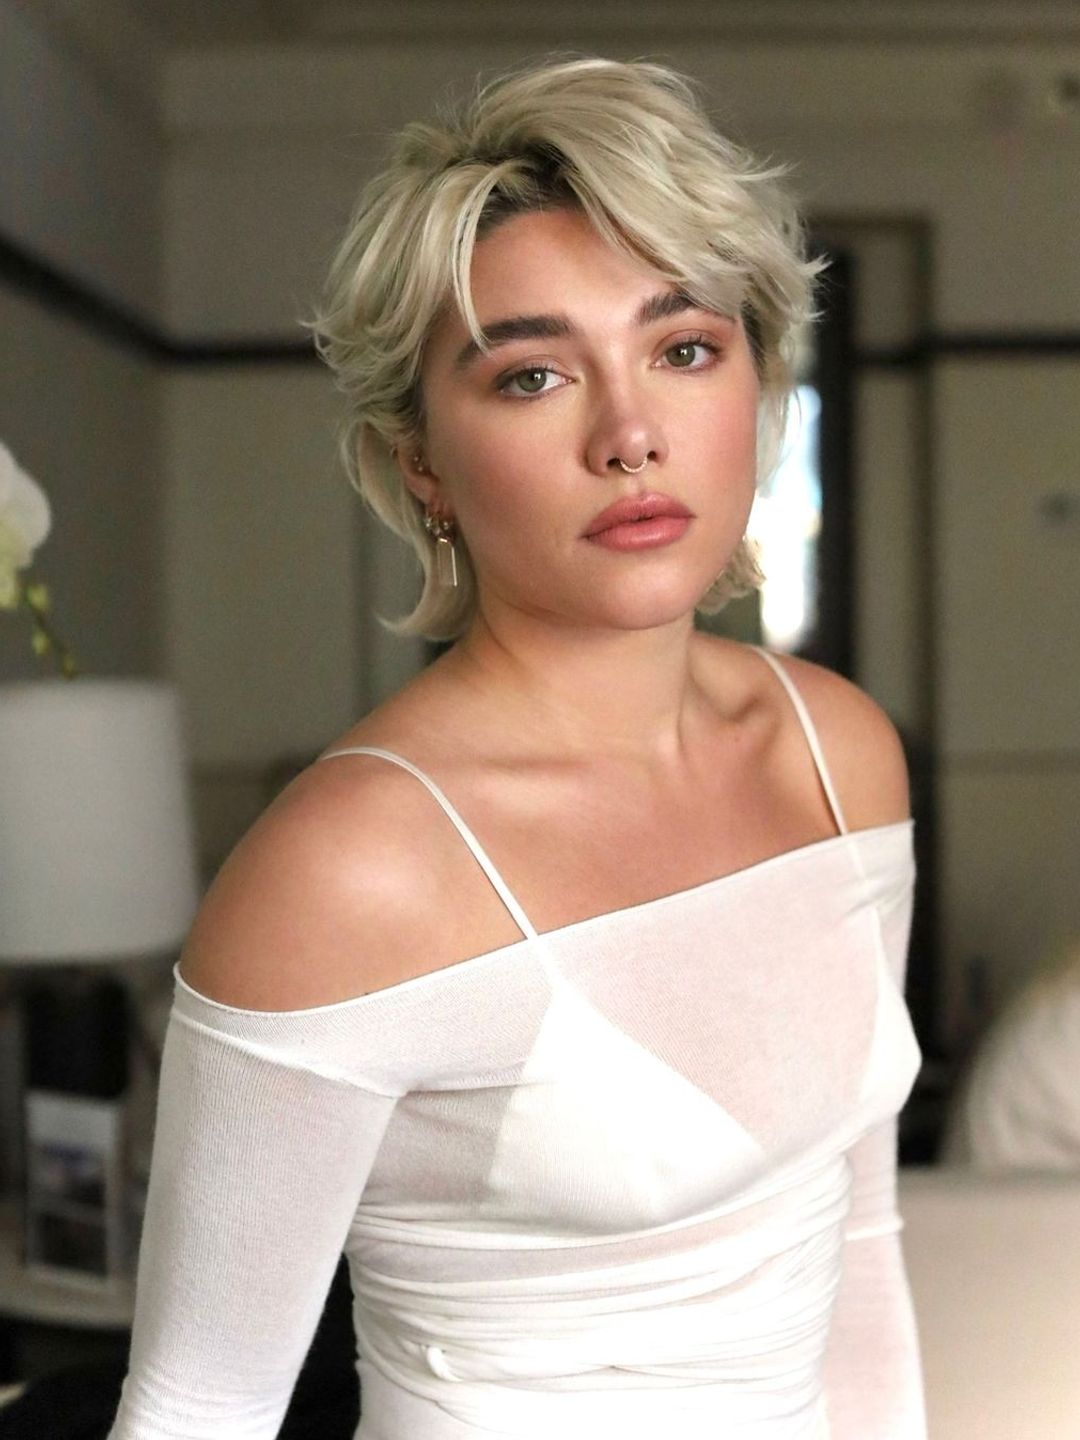 Florence Pugh looks fresh faced without mascara